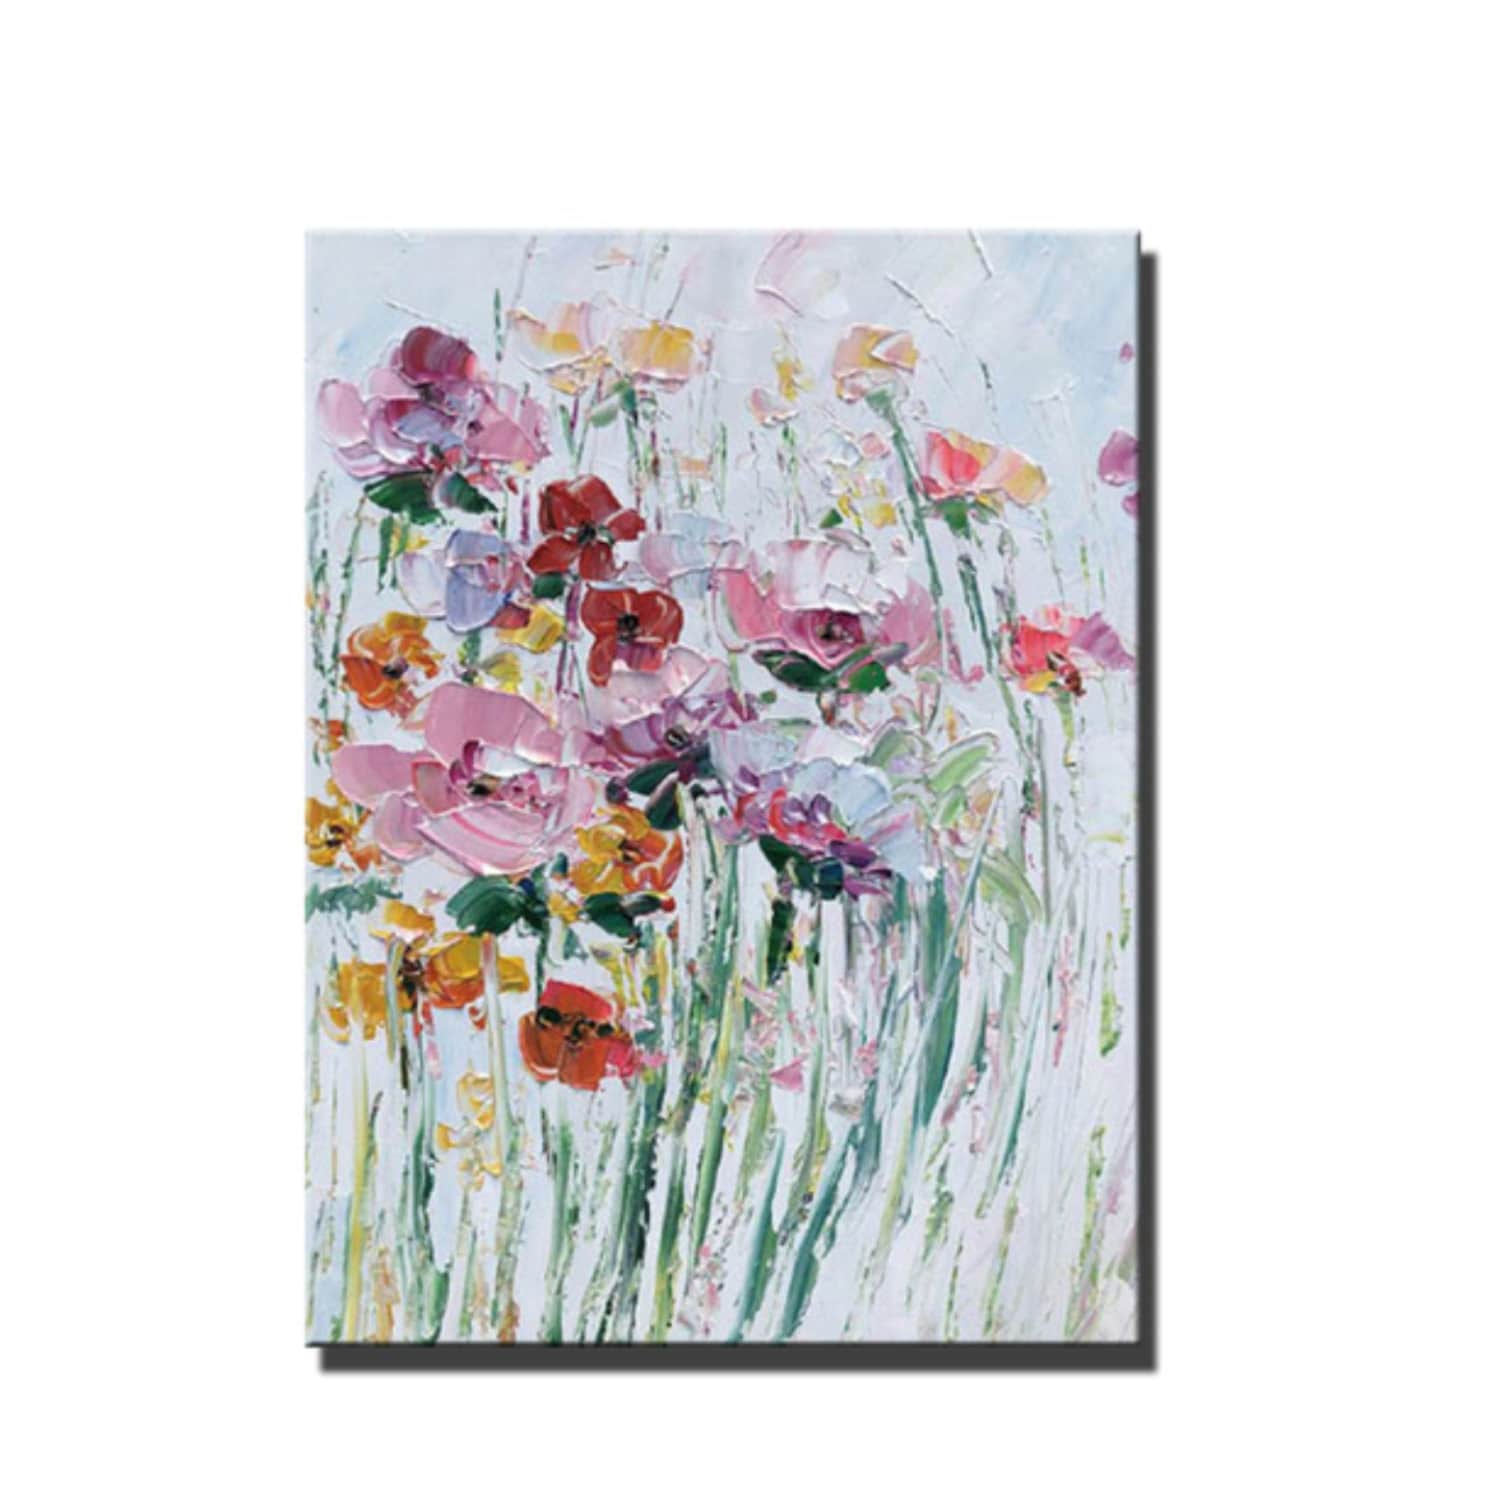 Colourful Flowers 100% Hand Painted Textured Art